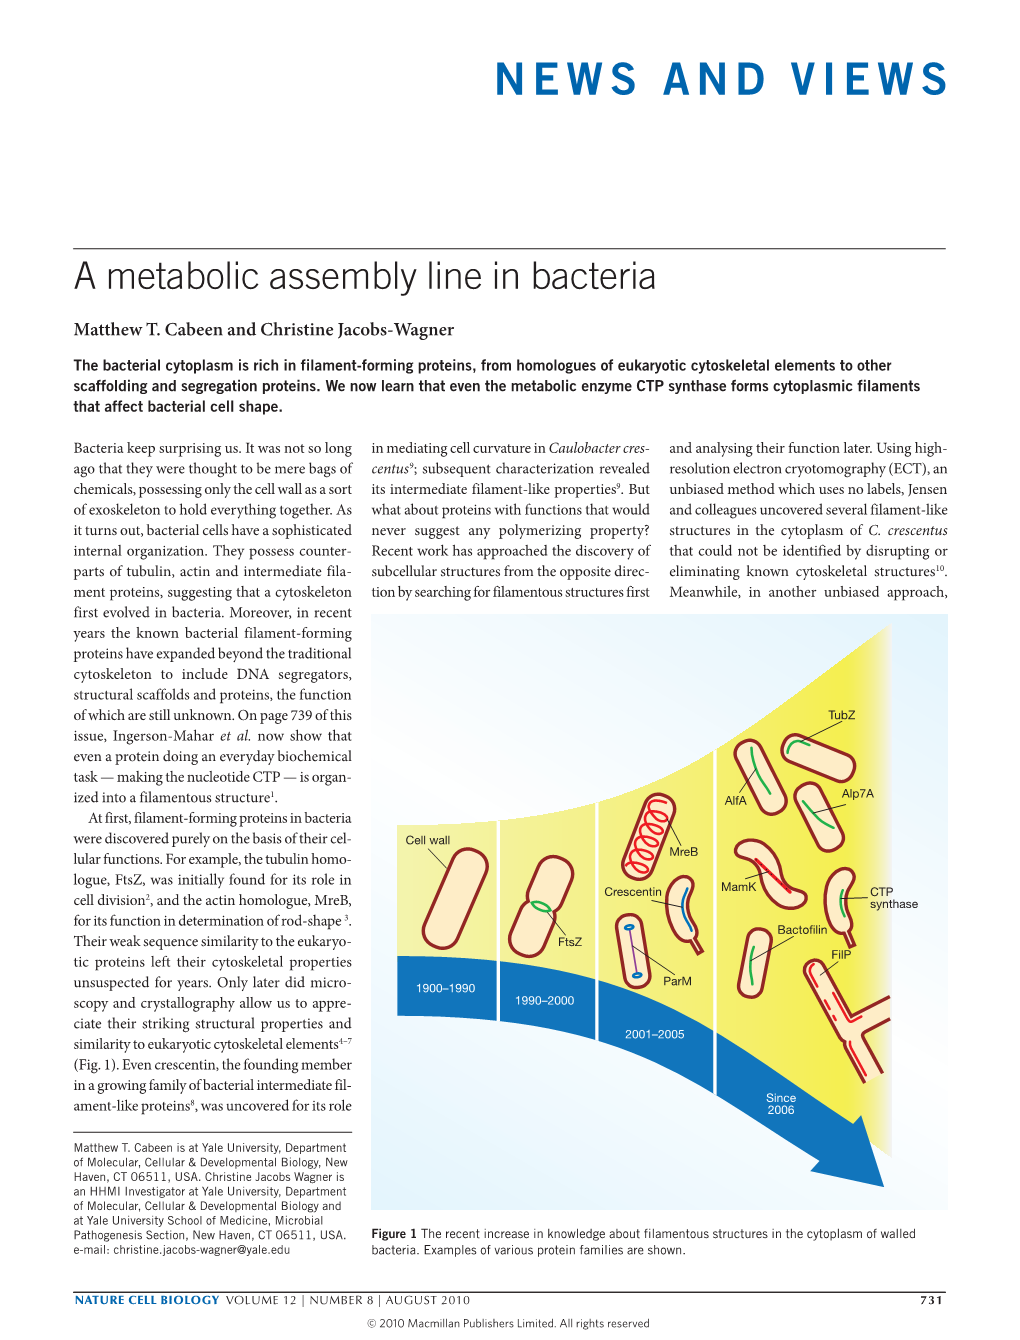 A Metabolic Assembly Line in Bacteria